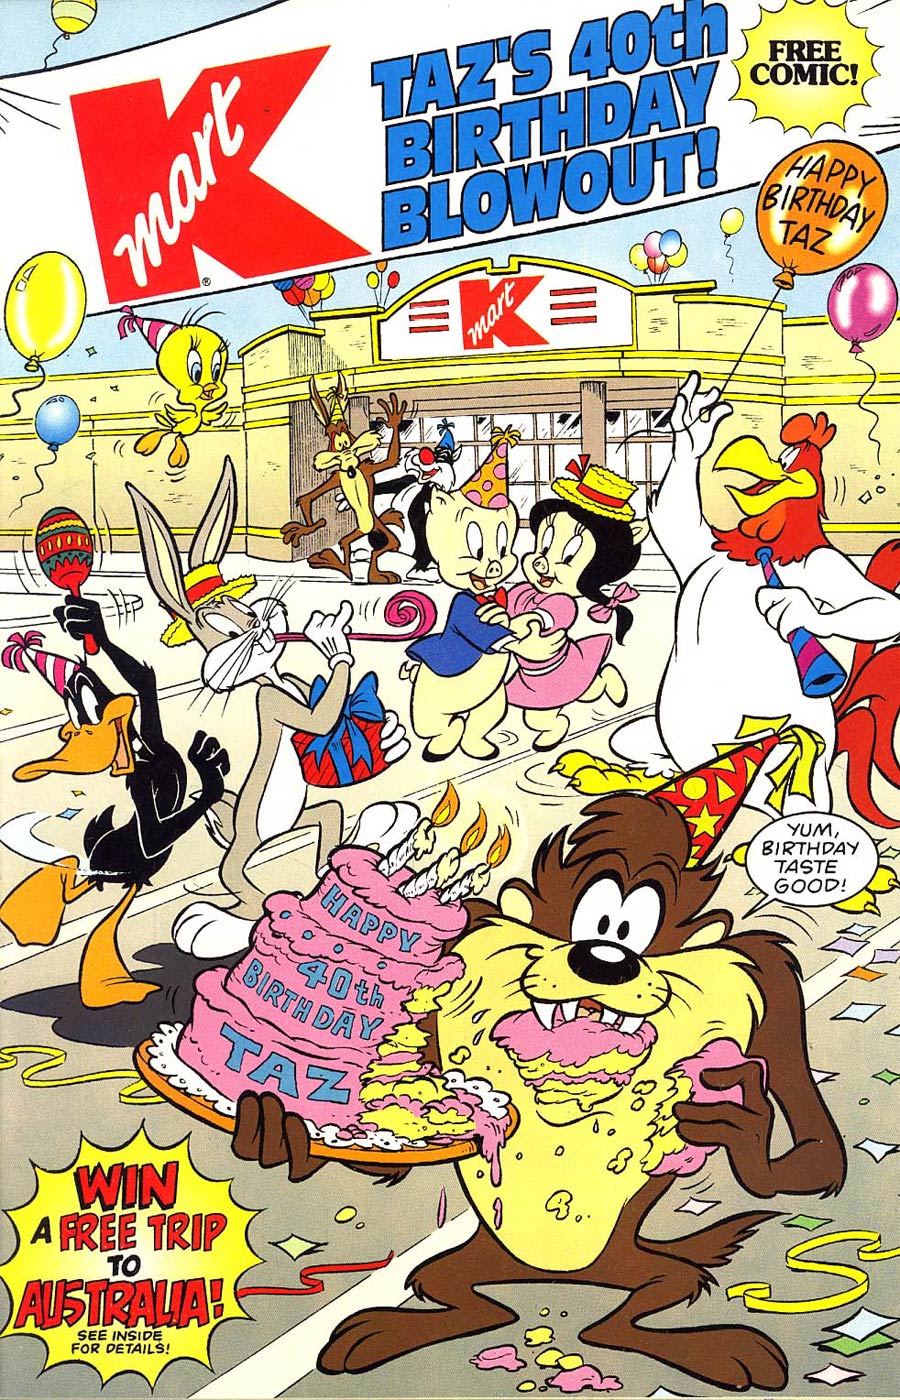 Tazs 40th Birthday Blowout K-Mart Promotional Comic Book